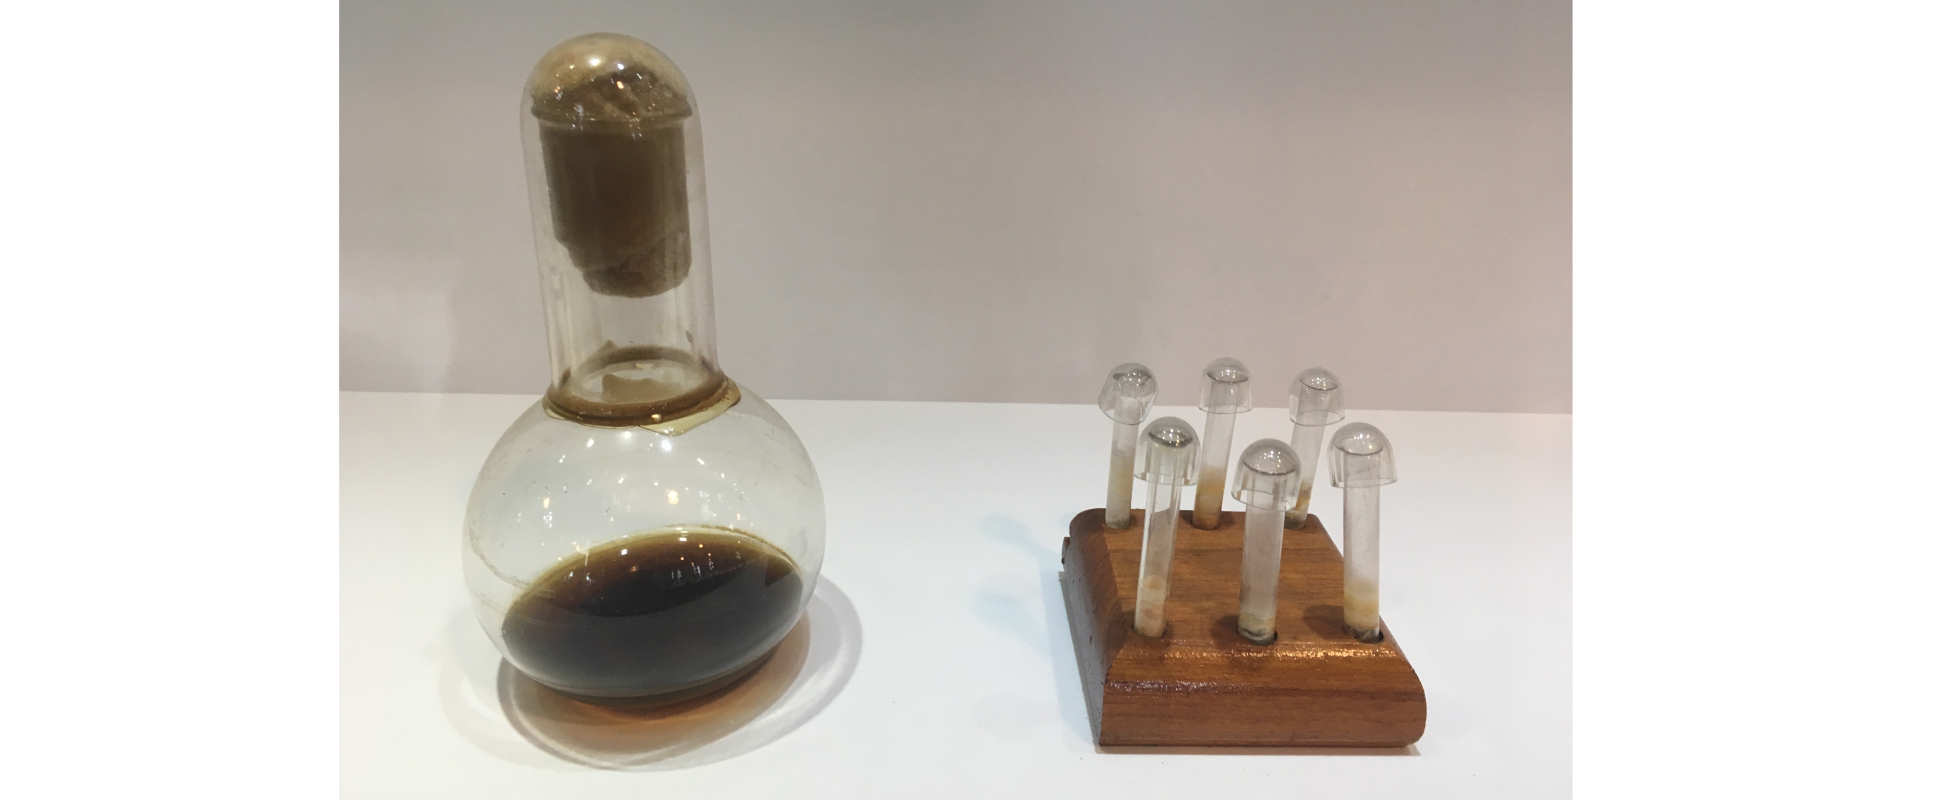 Glass flask with dark brown liquid and vials